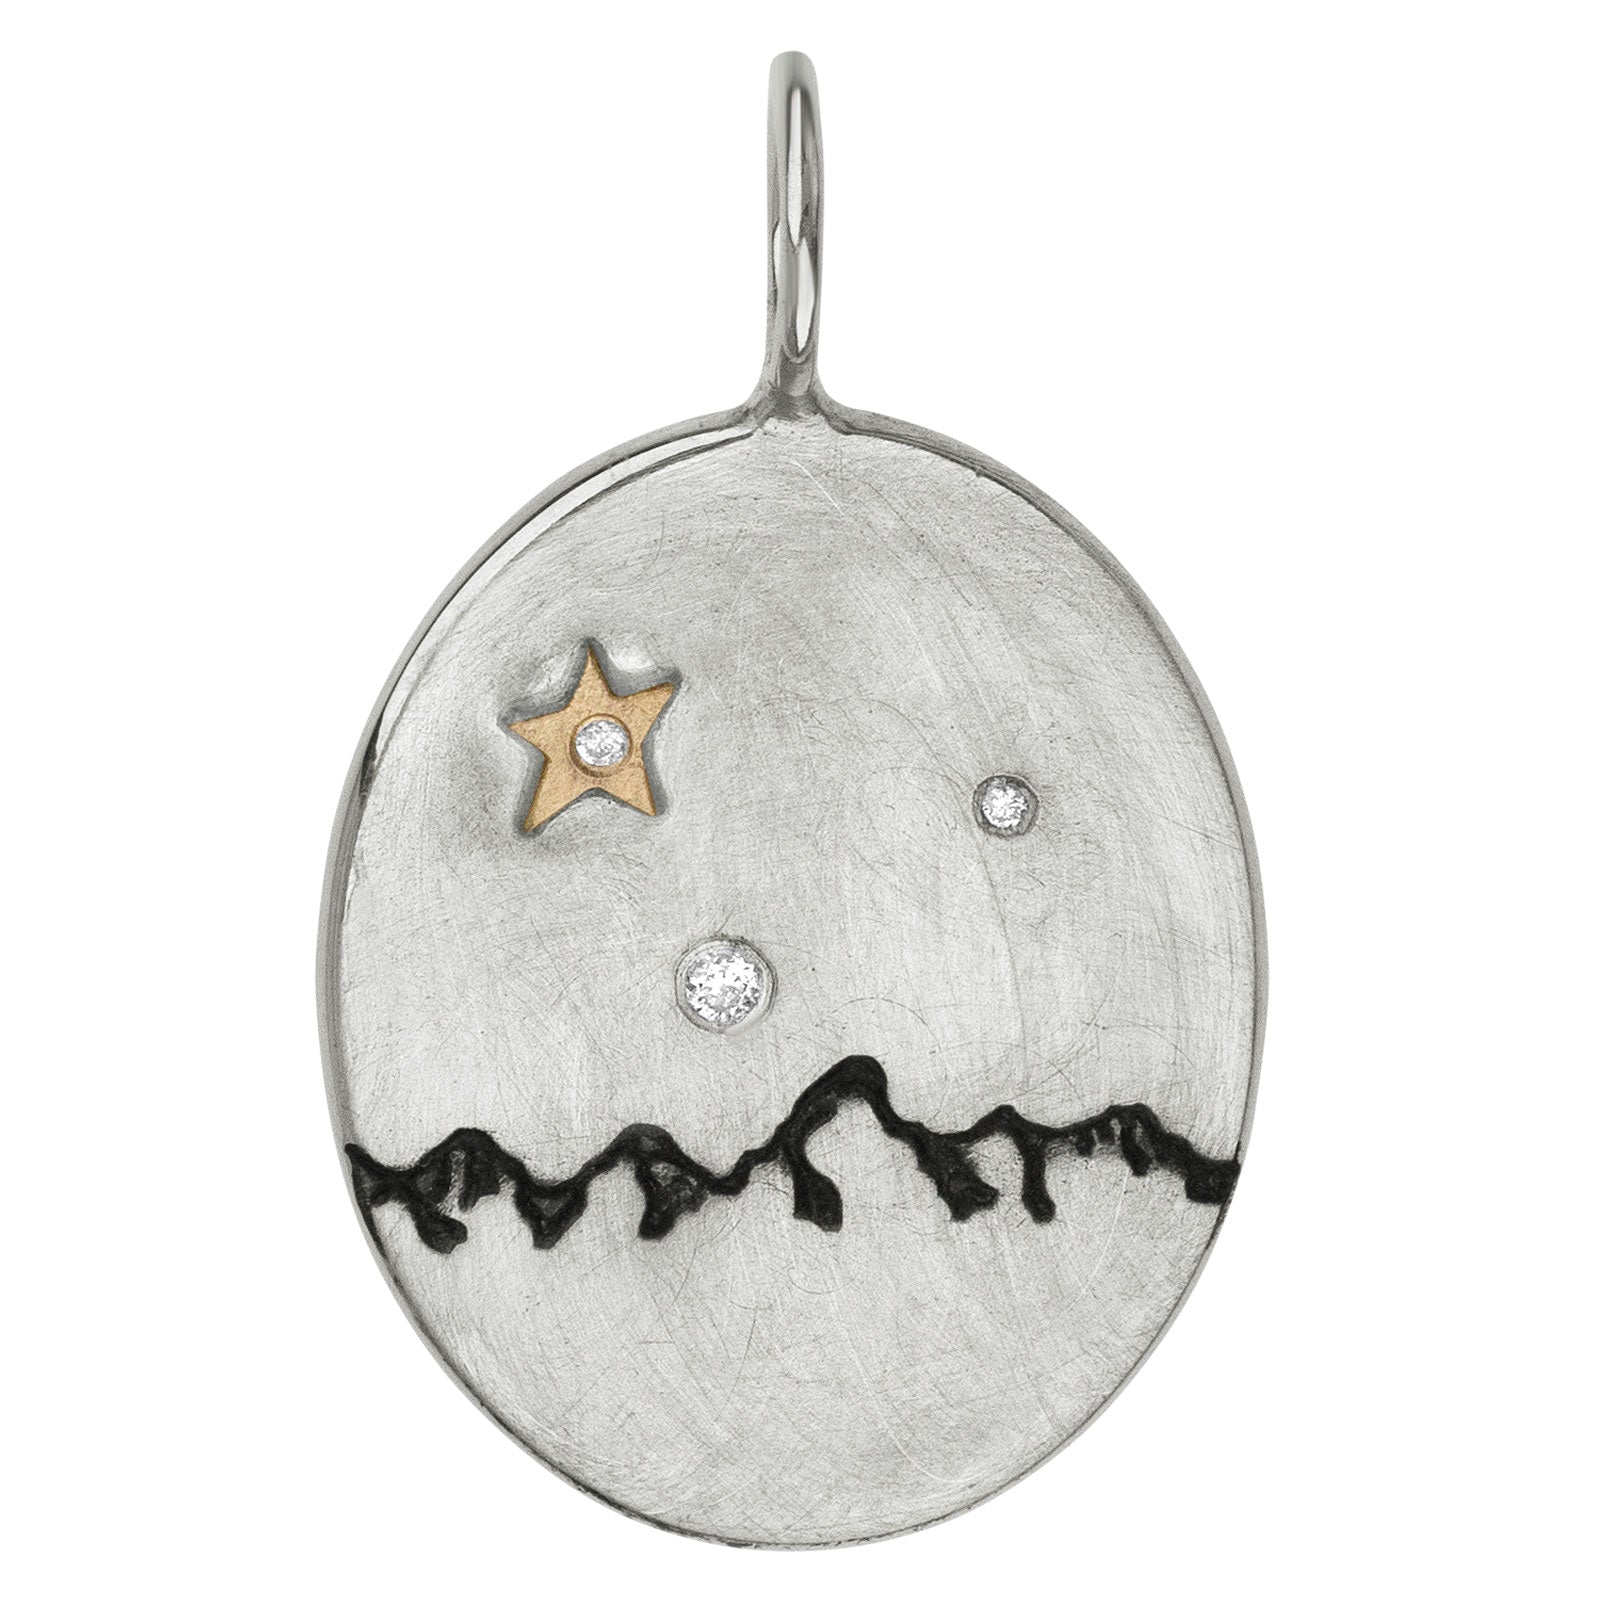 HEATHER B. MOORE STERLING SILVER OVAL TETON MOUNTAIN CHARM WITH GOLD STAR DIAMOND